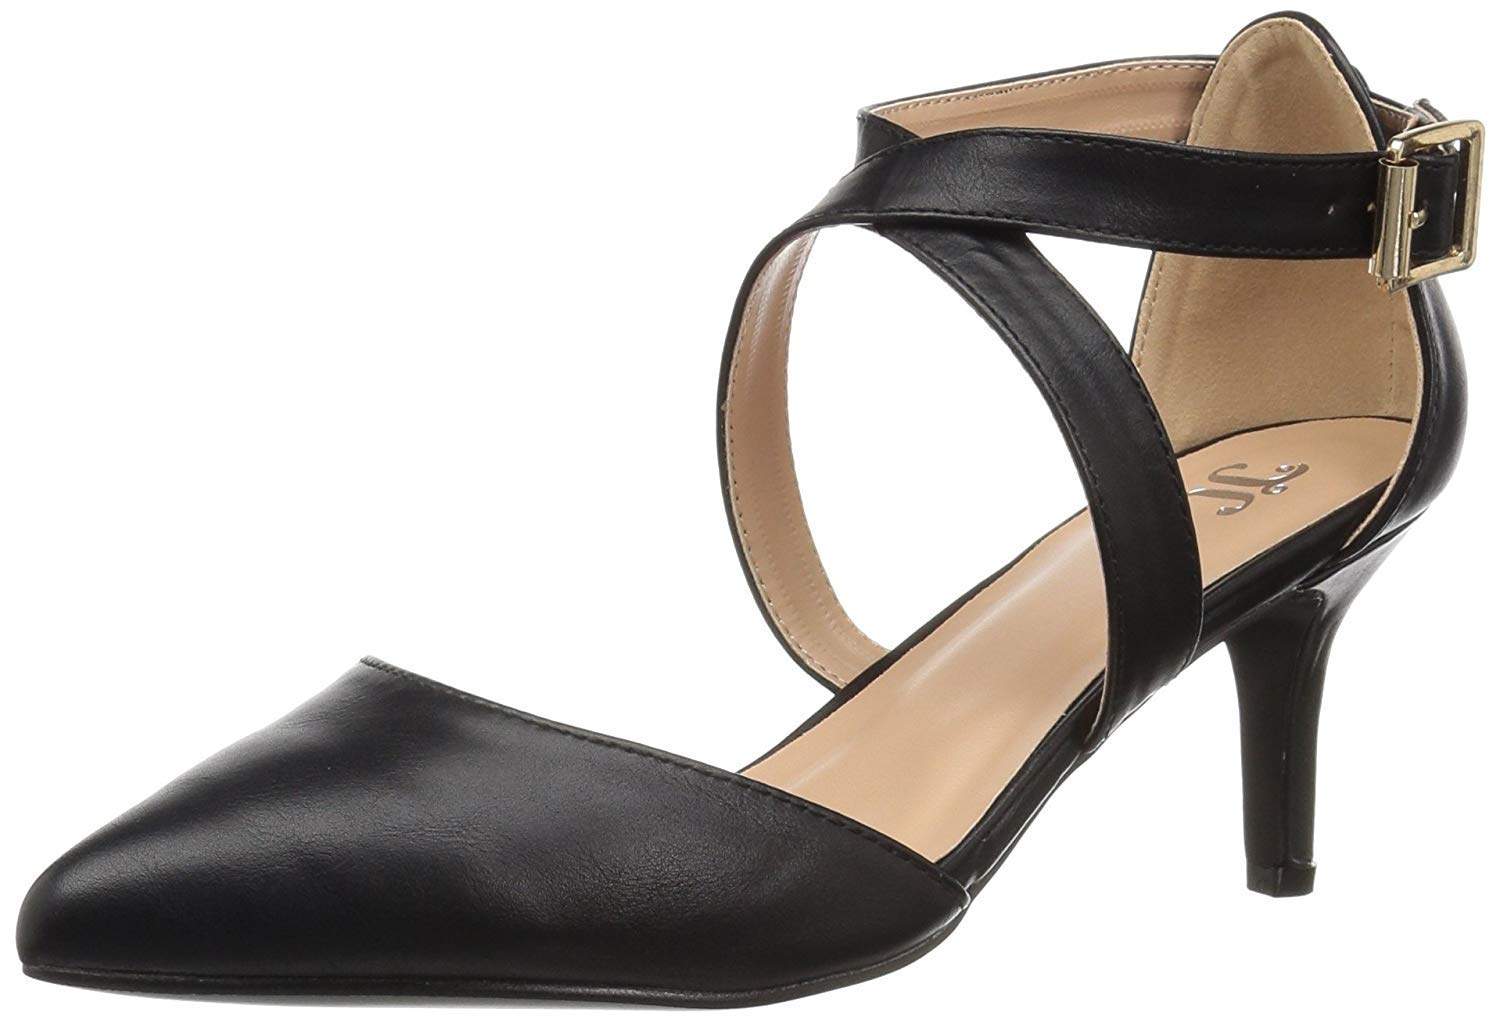 Brinley Co. Womens Matte Pointed Toe Ankle Strap D'Orsay Pump